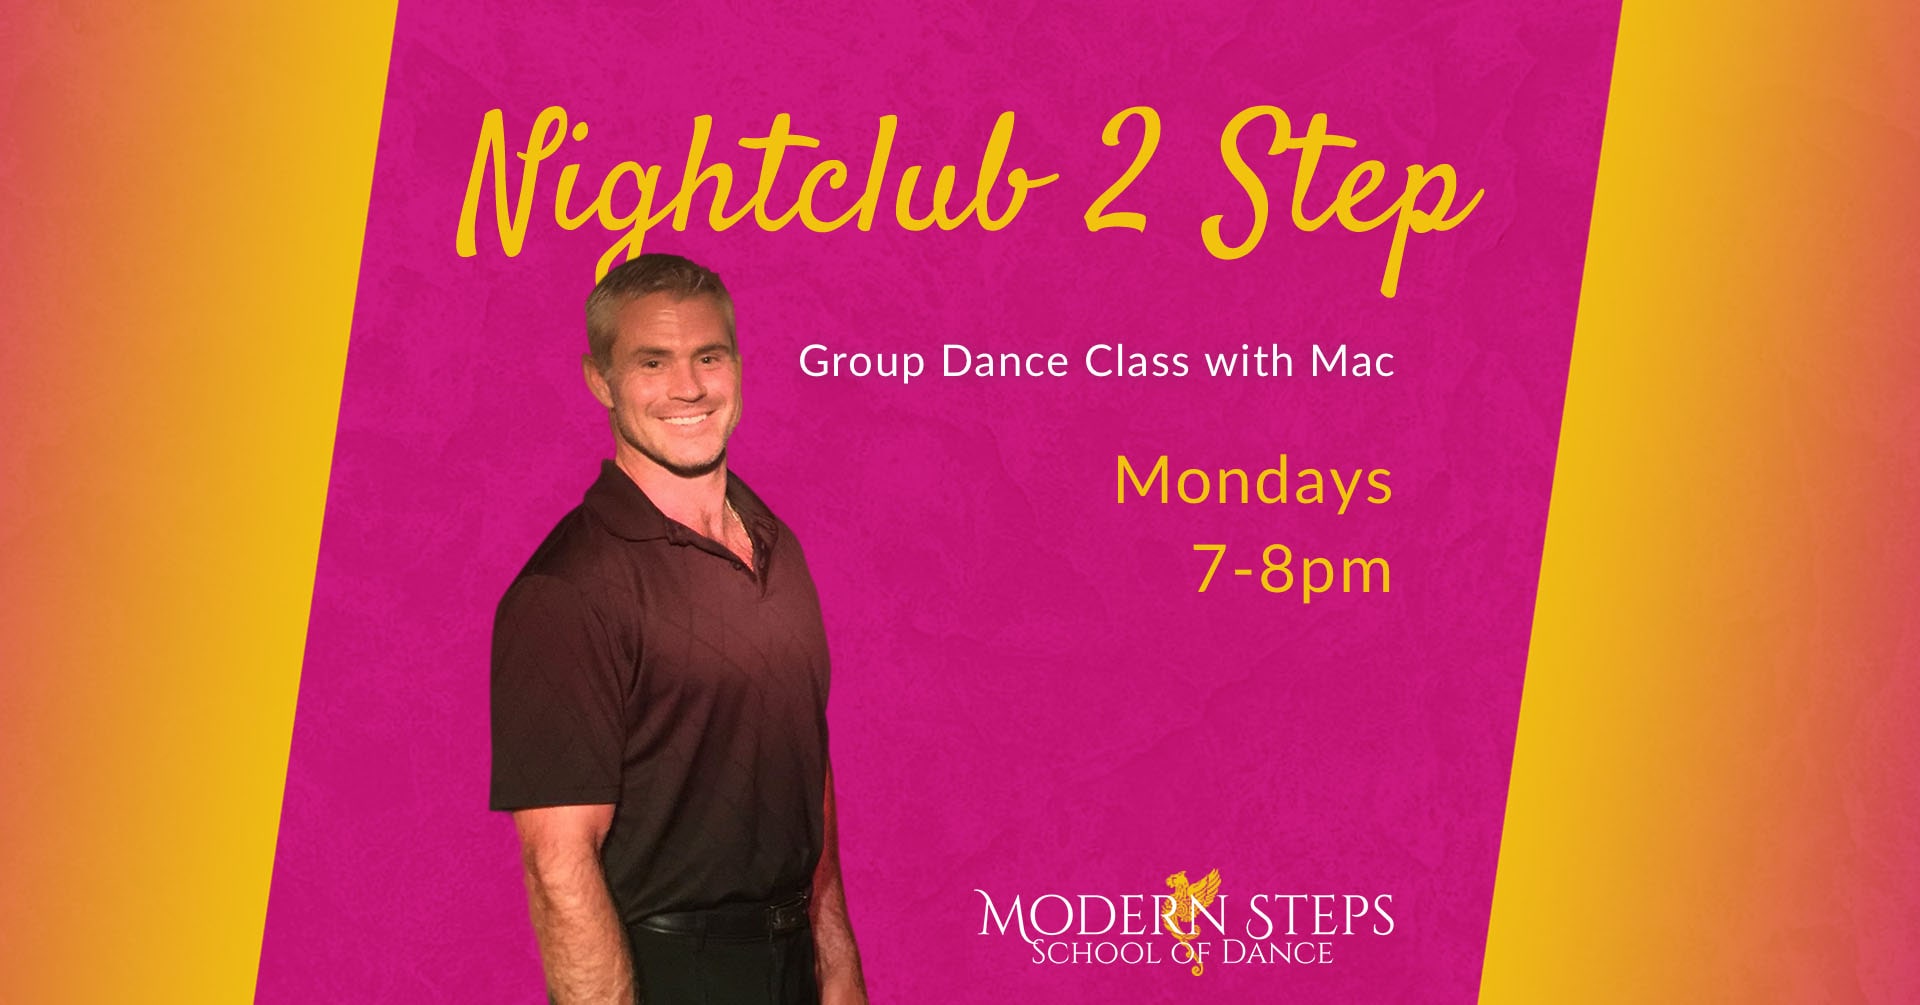 Nightclub Slow 2-Step group dance classes with Mac at Modern Steps Dance Studio in Naples Florida - Naples Florida Things to Do